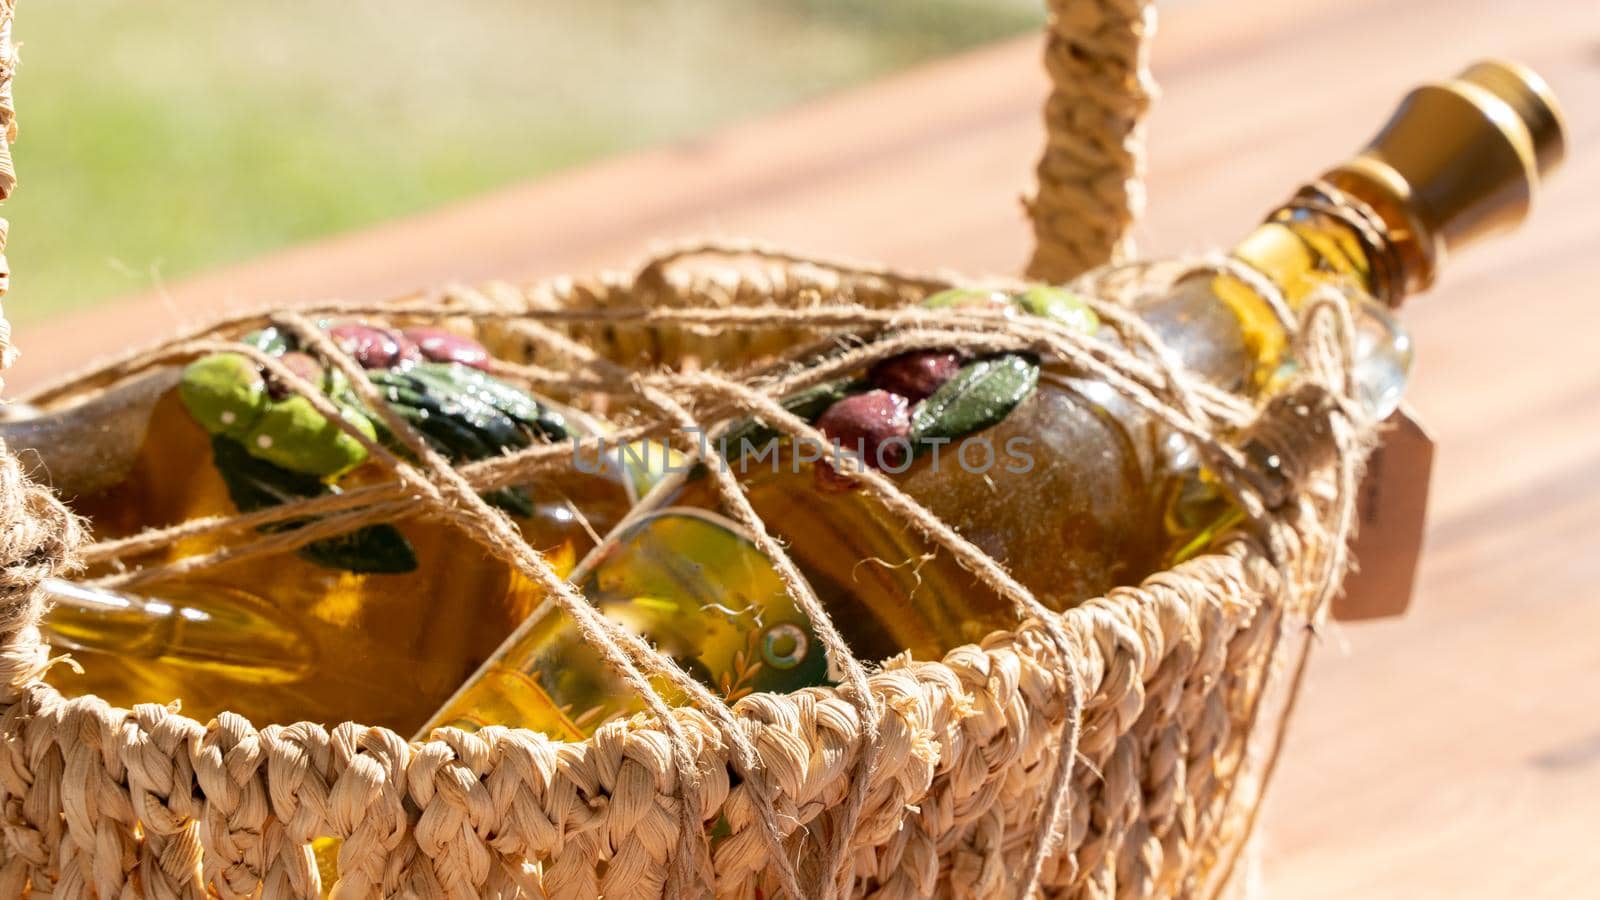 Olive oil in a glass bottle in a braided straw basket by voktybre